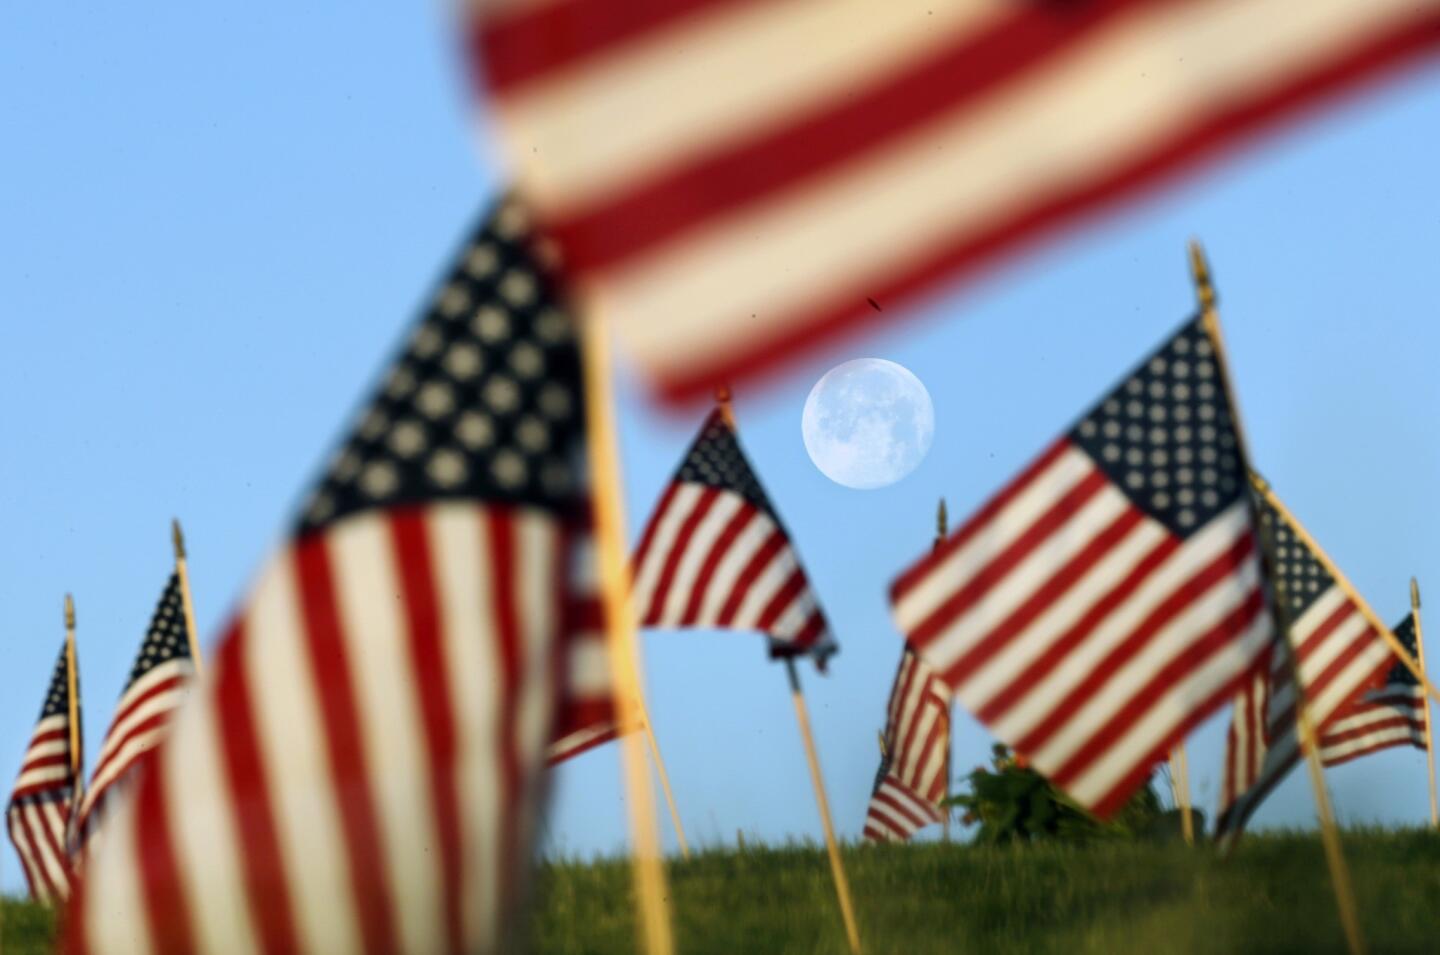 The moon over flags in New Jersey